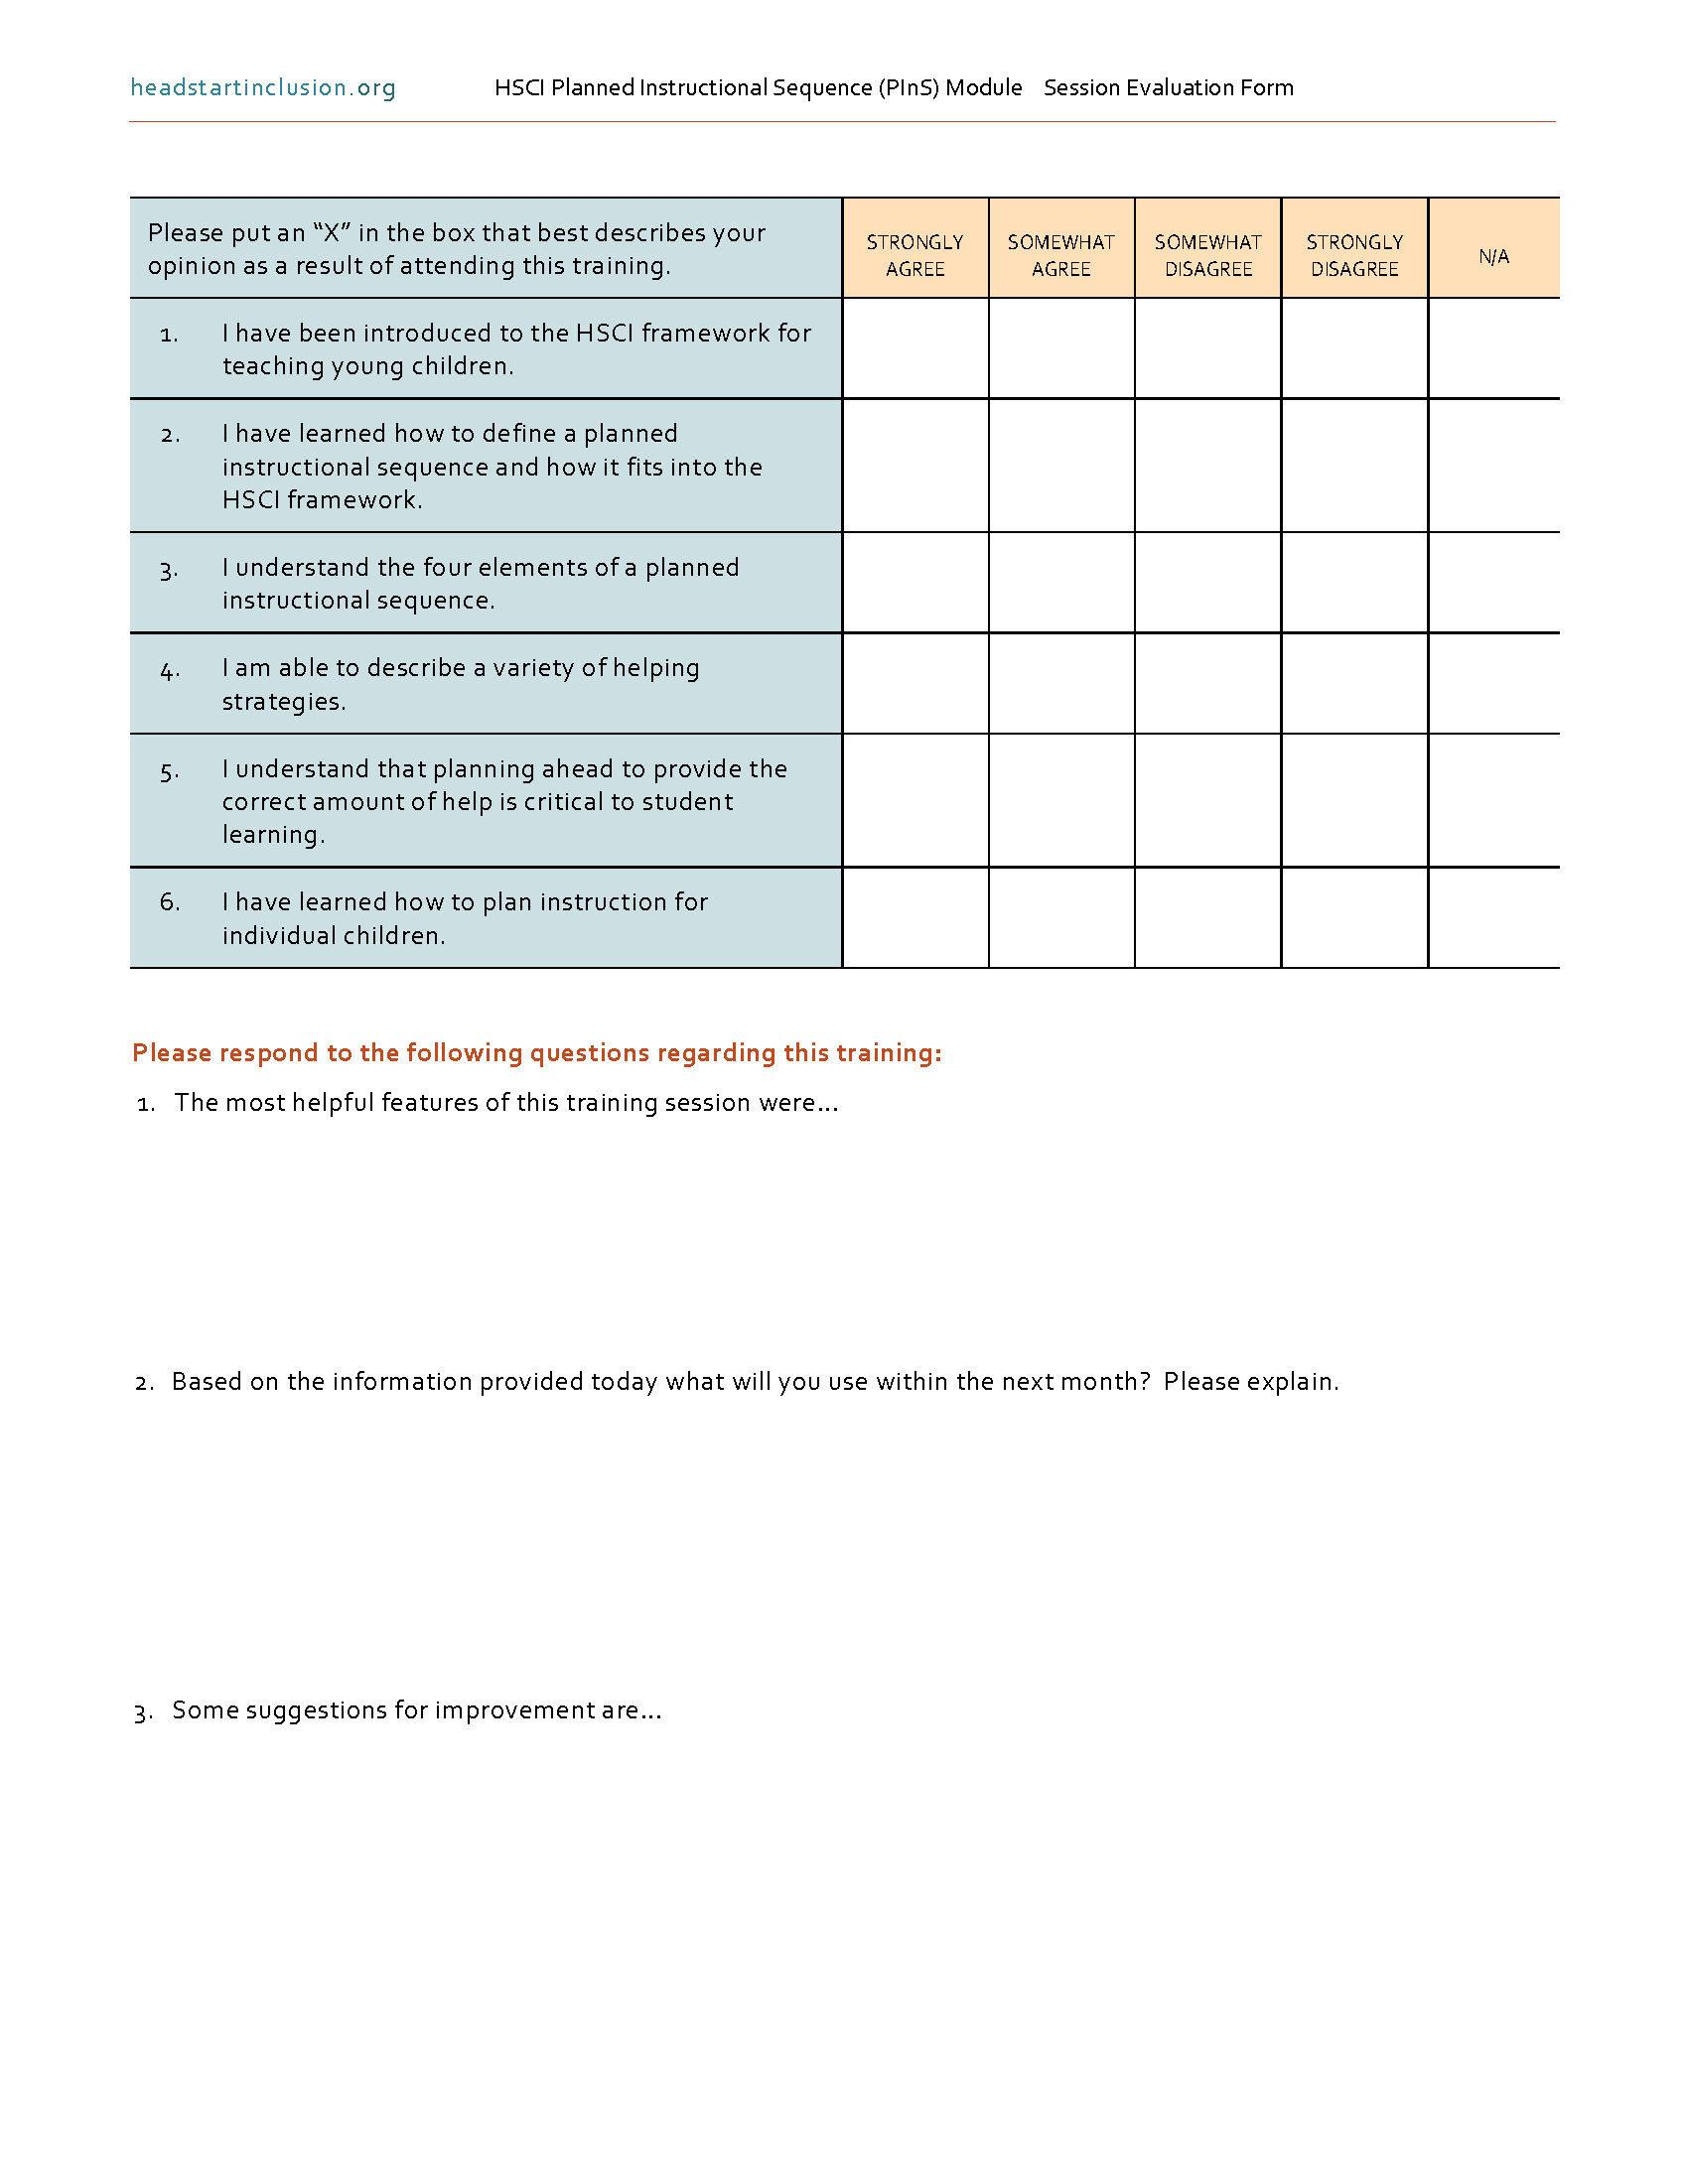 Screenshot of second page of Planned Instructional Sequence(PinS) Module Session Evaluation Form.